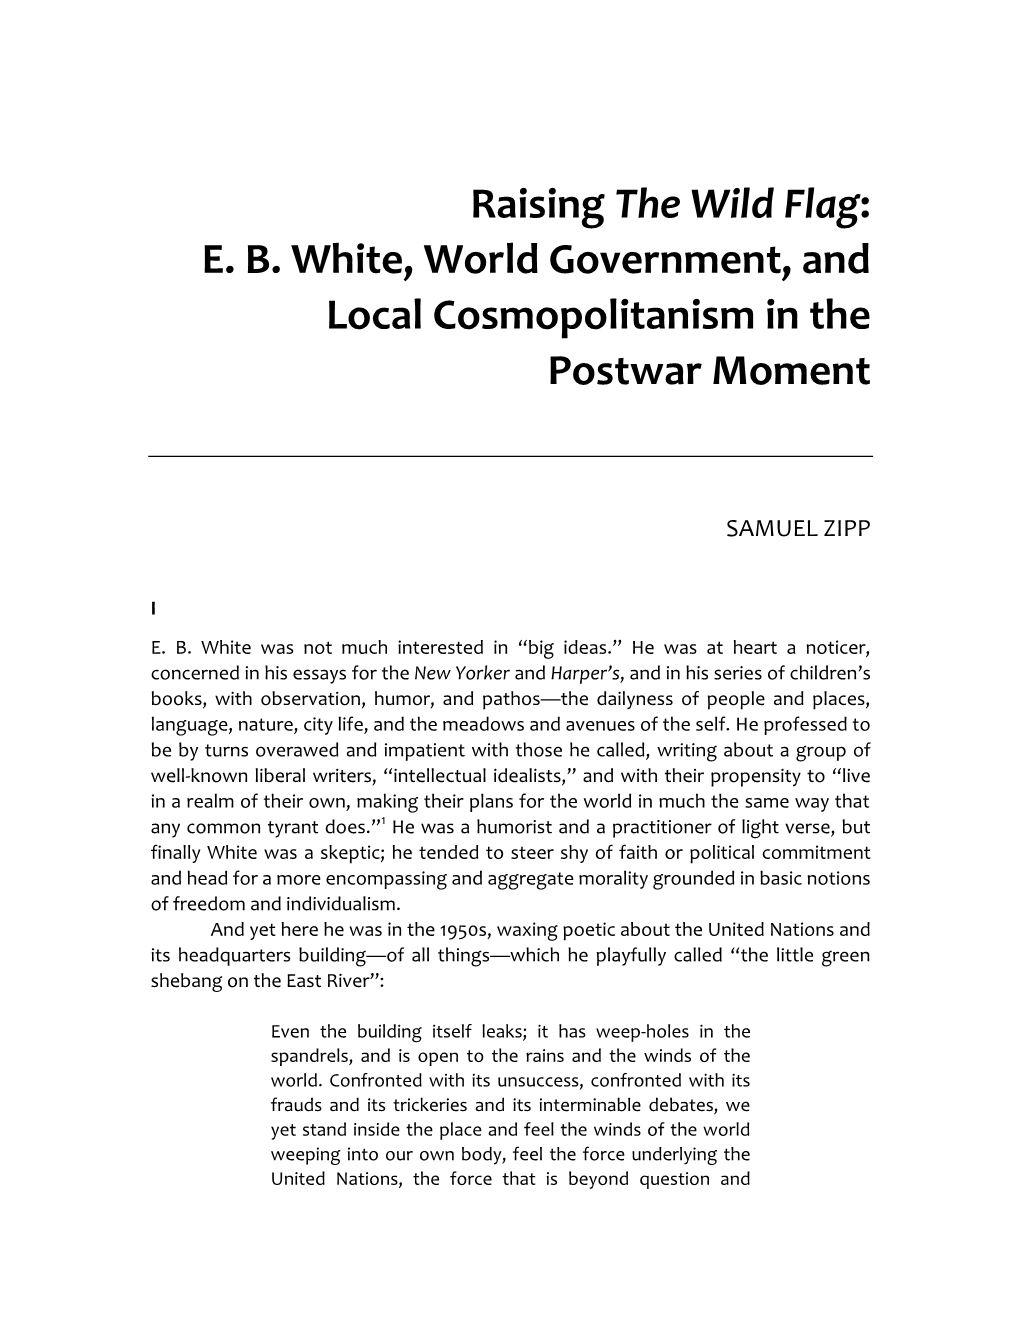 Raising the Wild Flag: E. B. White, World Government, and Local Cosmopolitanism in the Postwar Moment